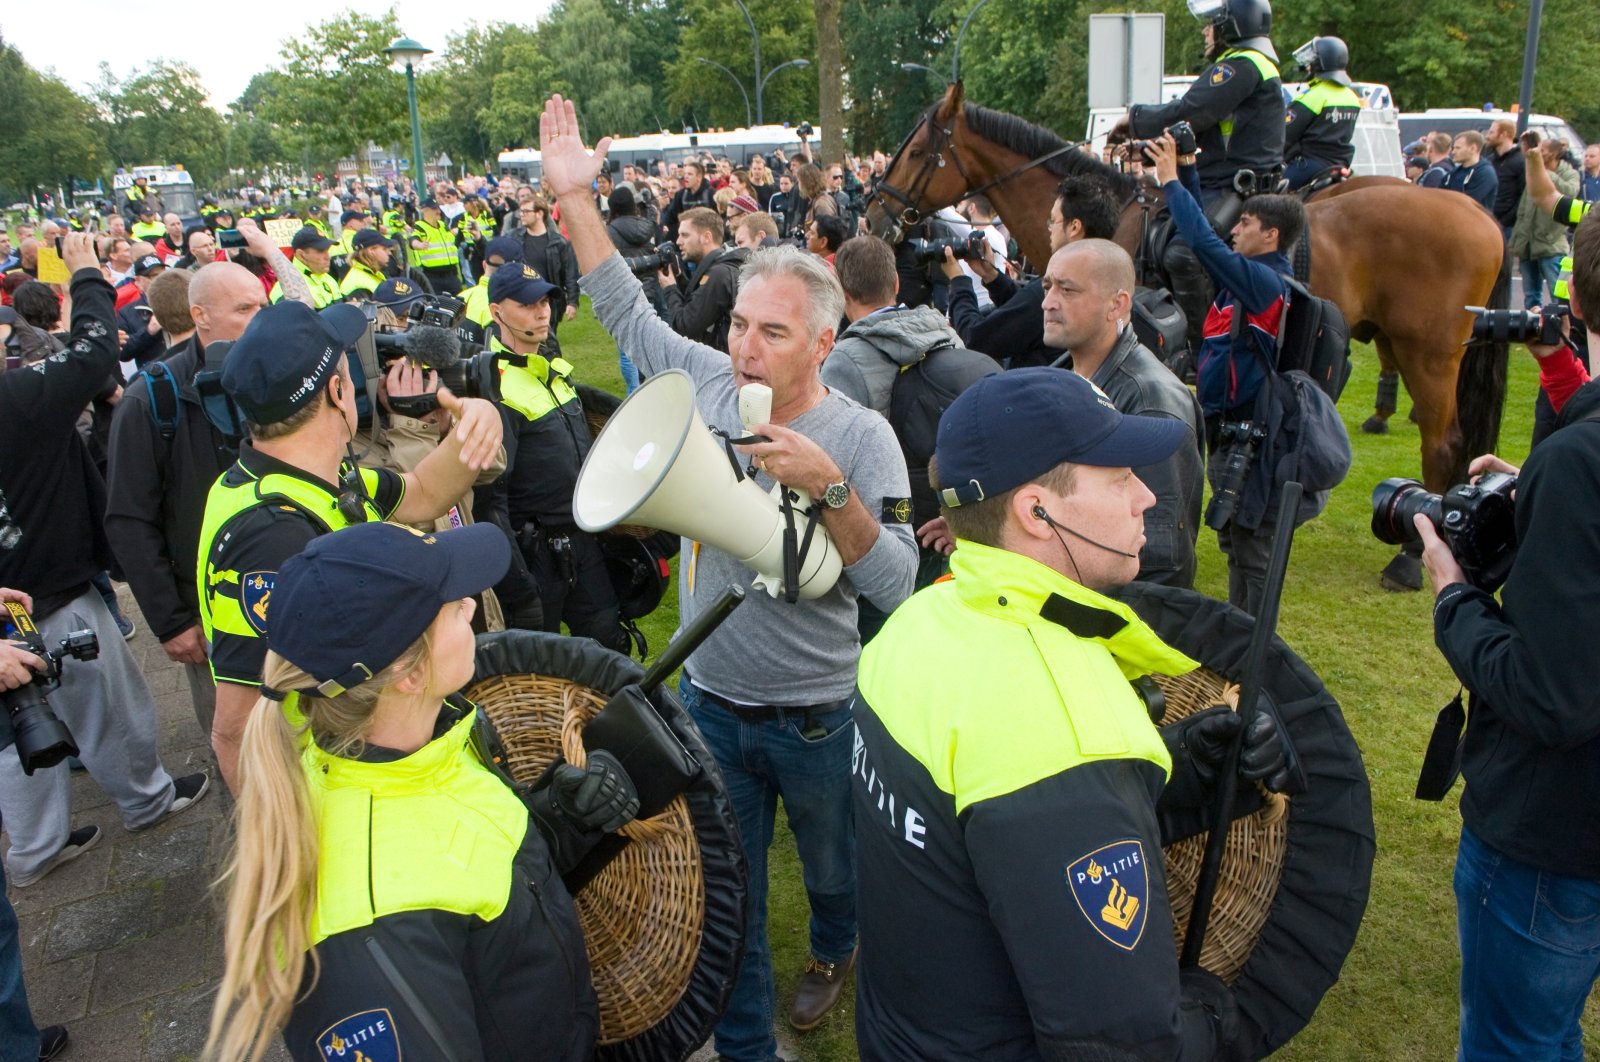 Dutch politician Edwin Wagensveld, the head of the far-right PEGIDA addresses an anti-Islam demonstration in Enschede, the Netherlands. Sept. 17, 2017. (Shutterstock Photo)